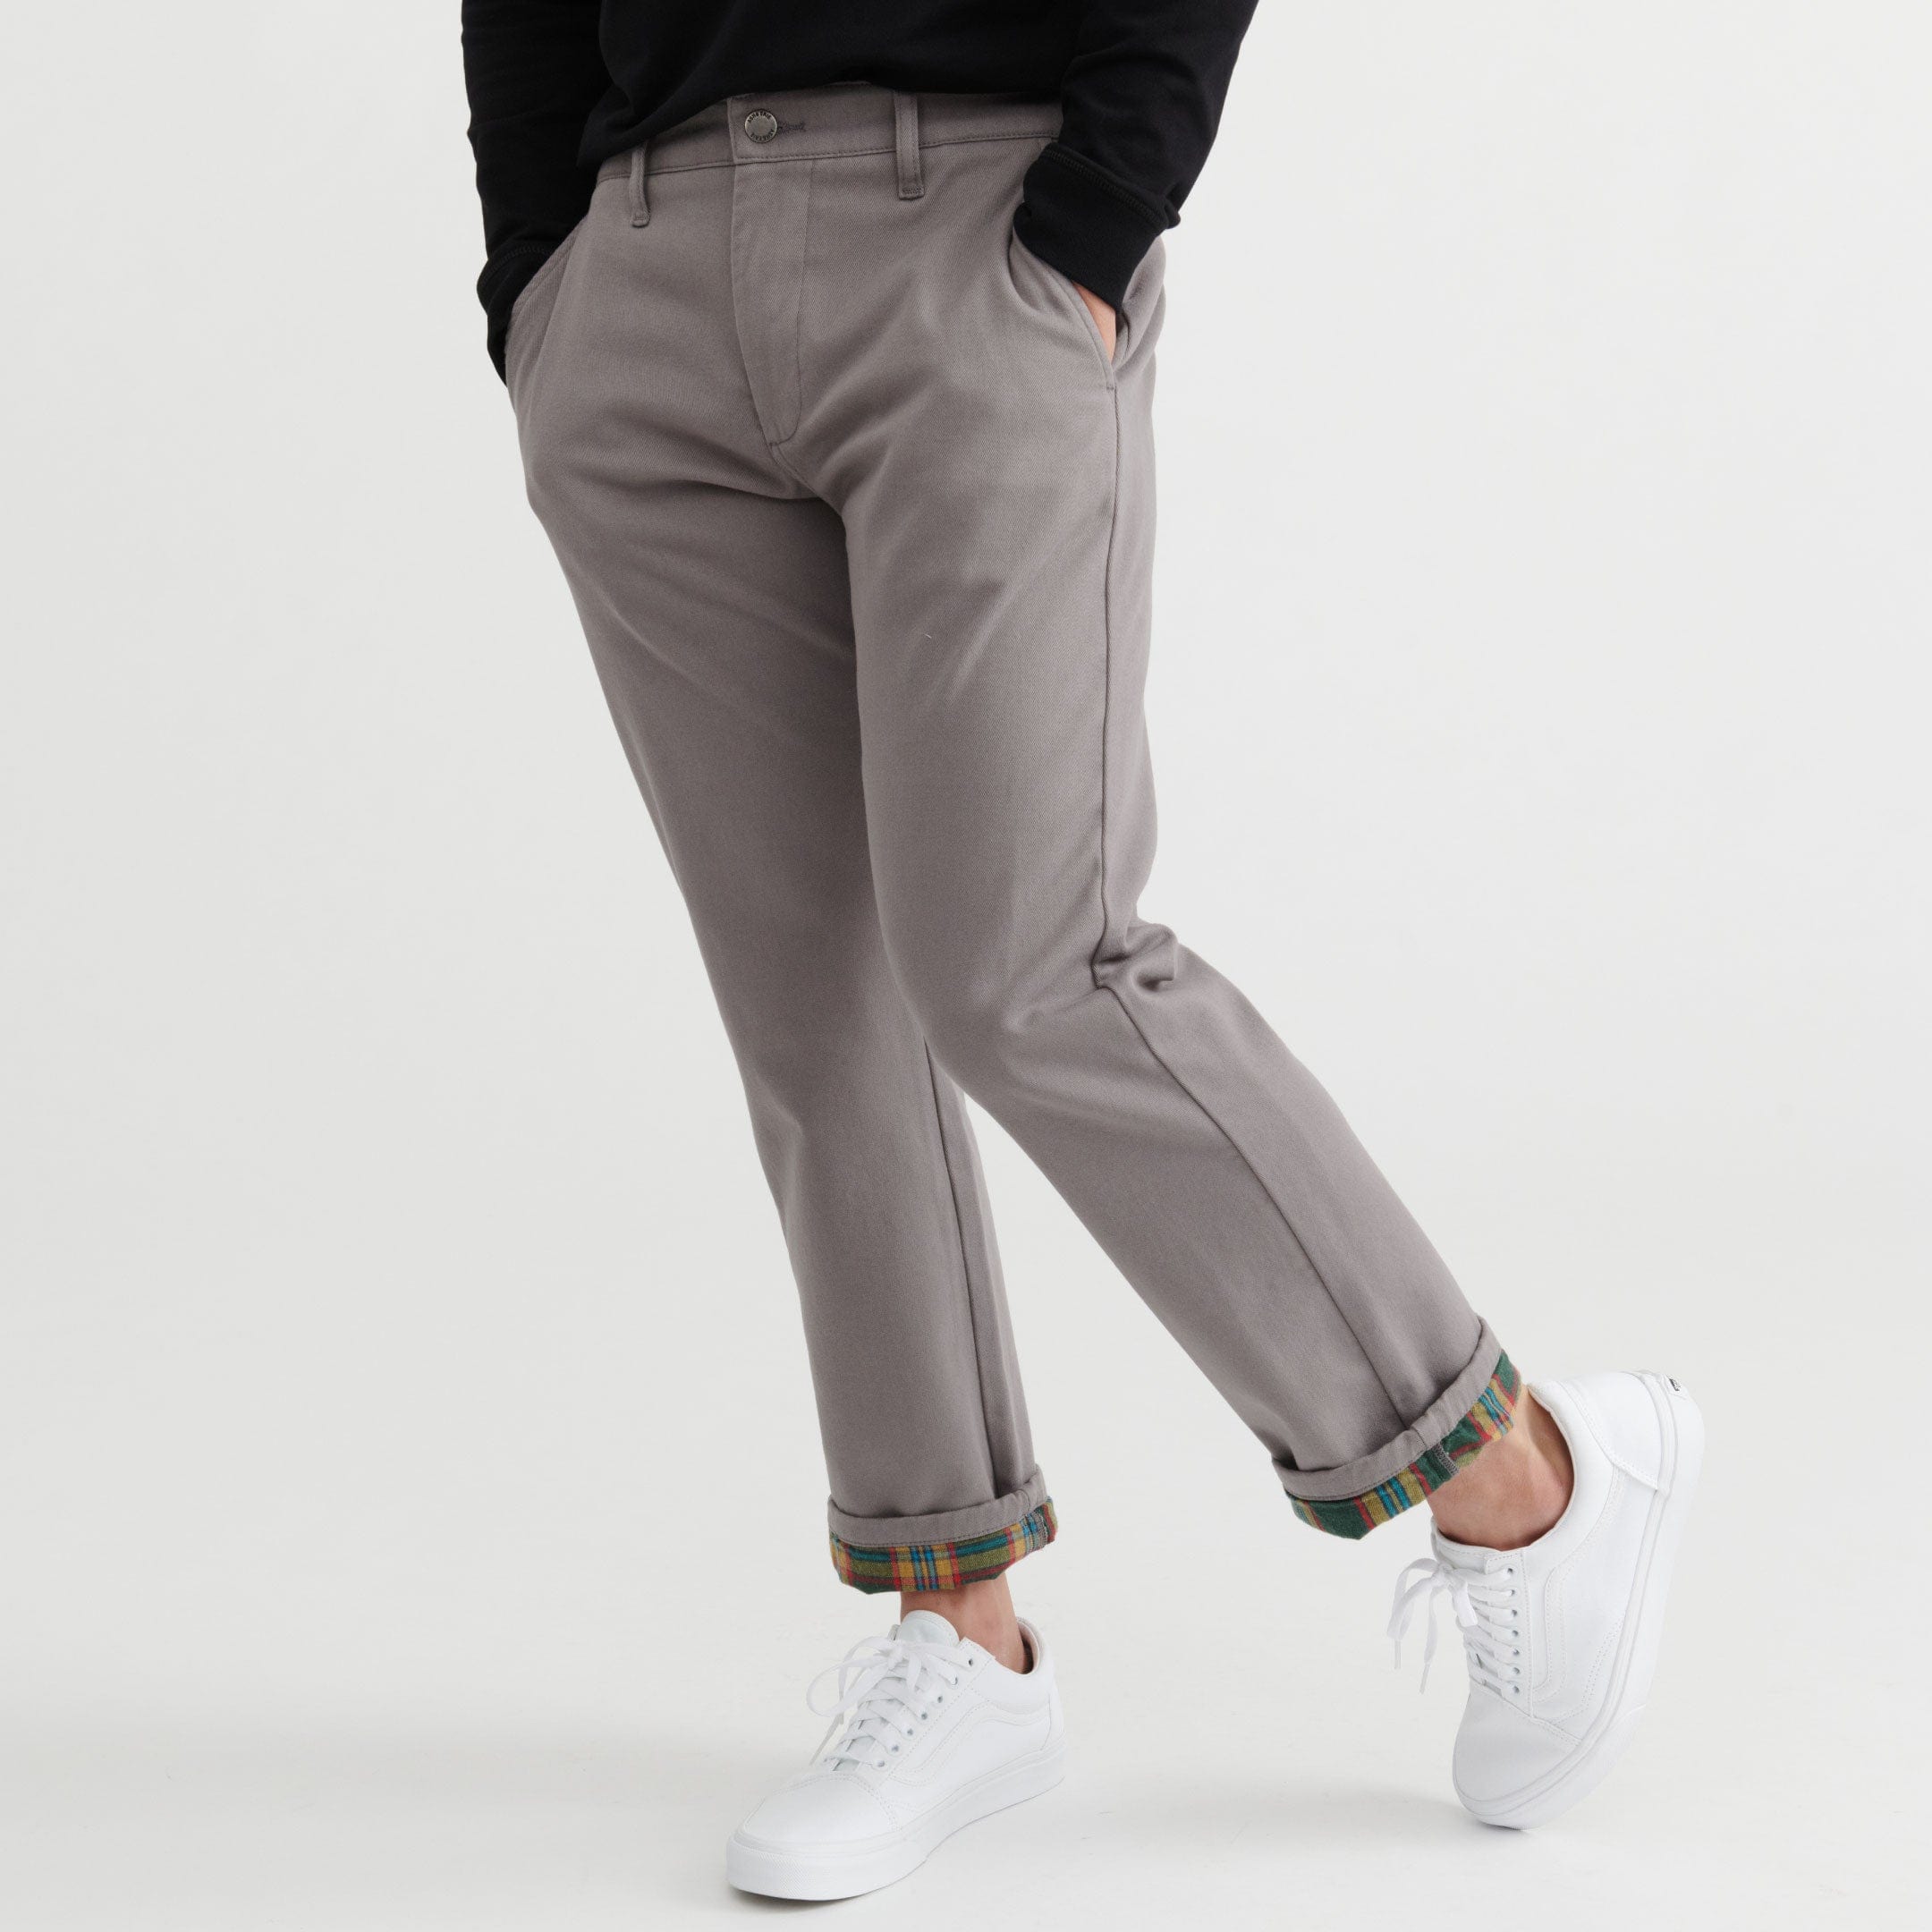 Ash & Erie Steel Grey Flannel Lined Chinos for Short Men